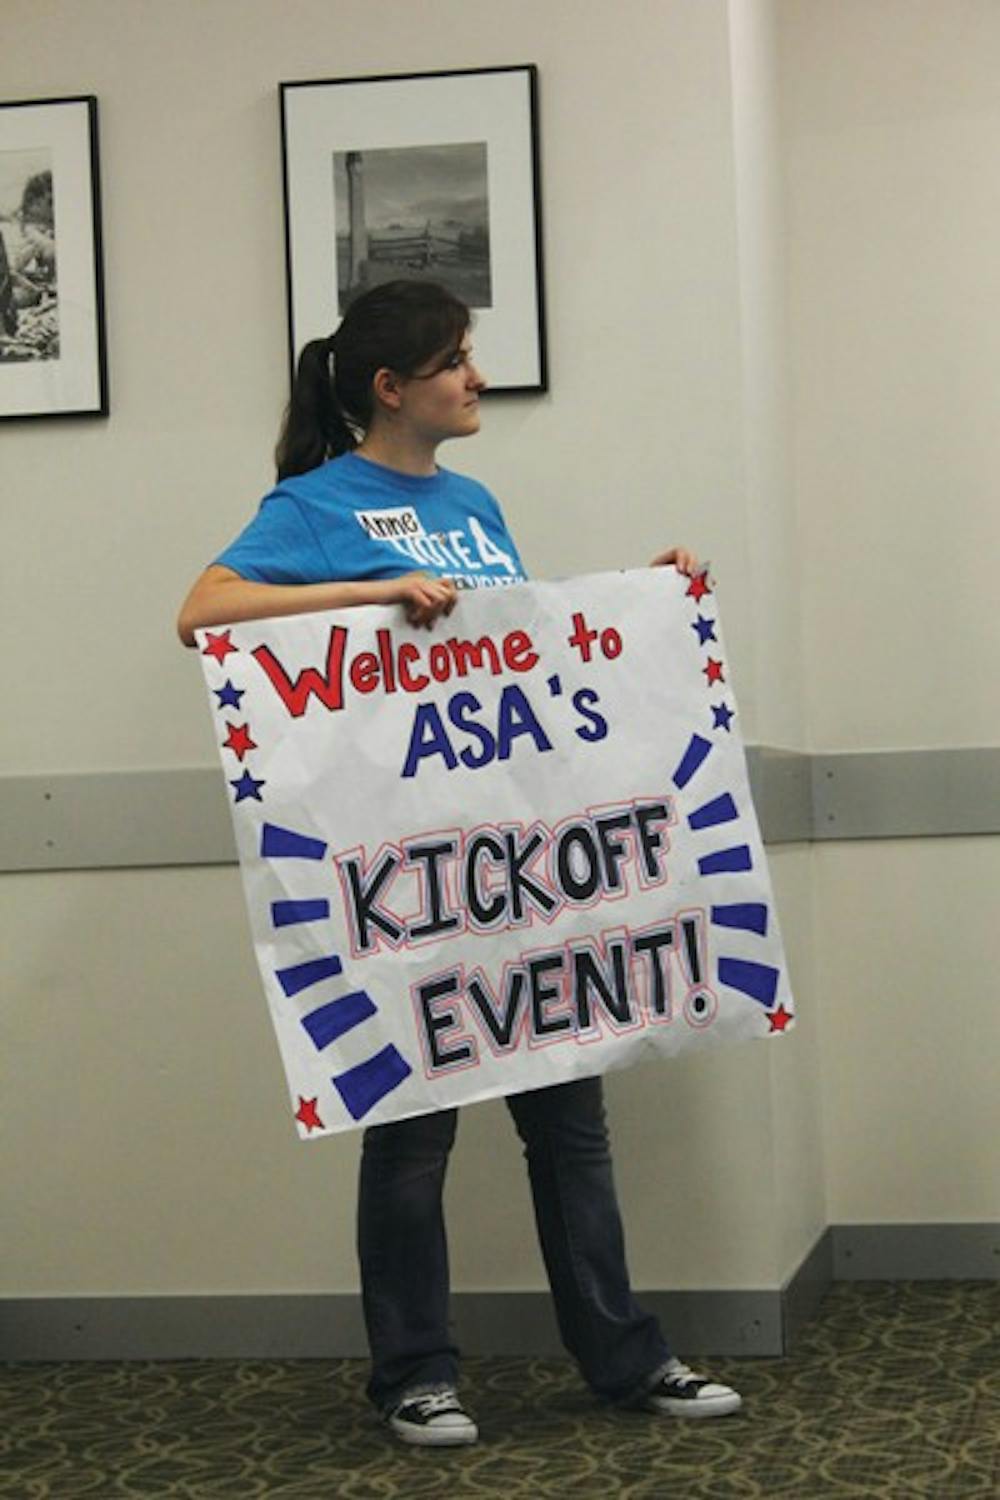 Student Anne Taylor promotes Arizona Students' Association's Voter Kick-off Rally on Tuesday in preparation to increase student voters for the November elections. (Photo by Emily Griffin)